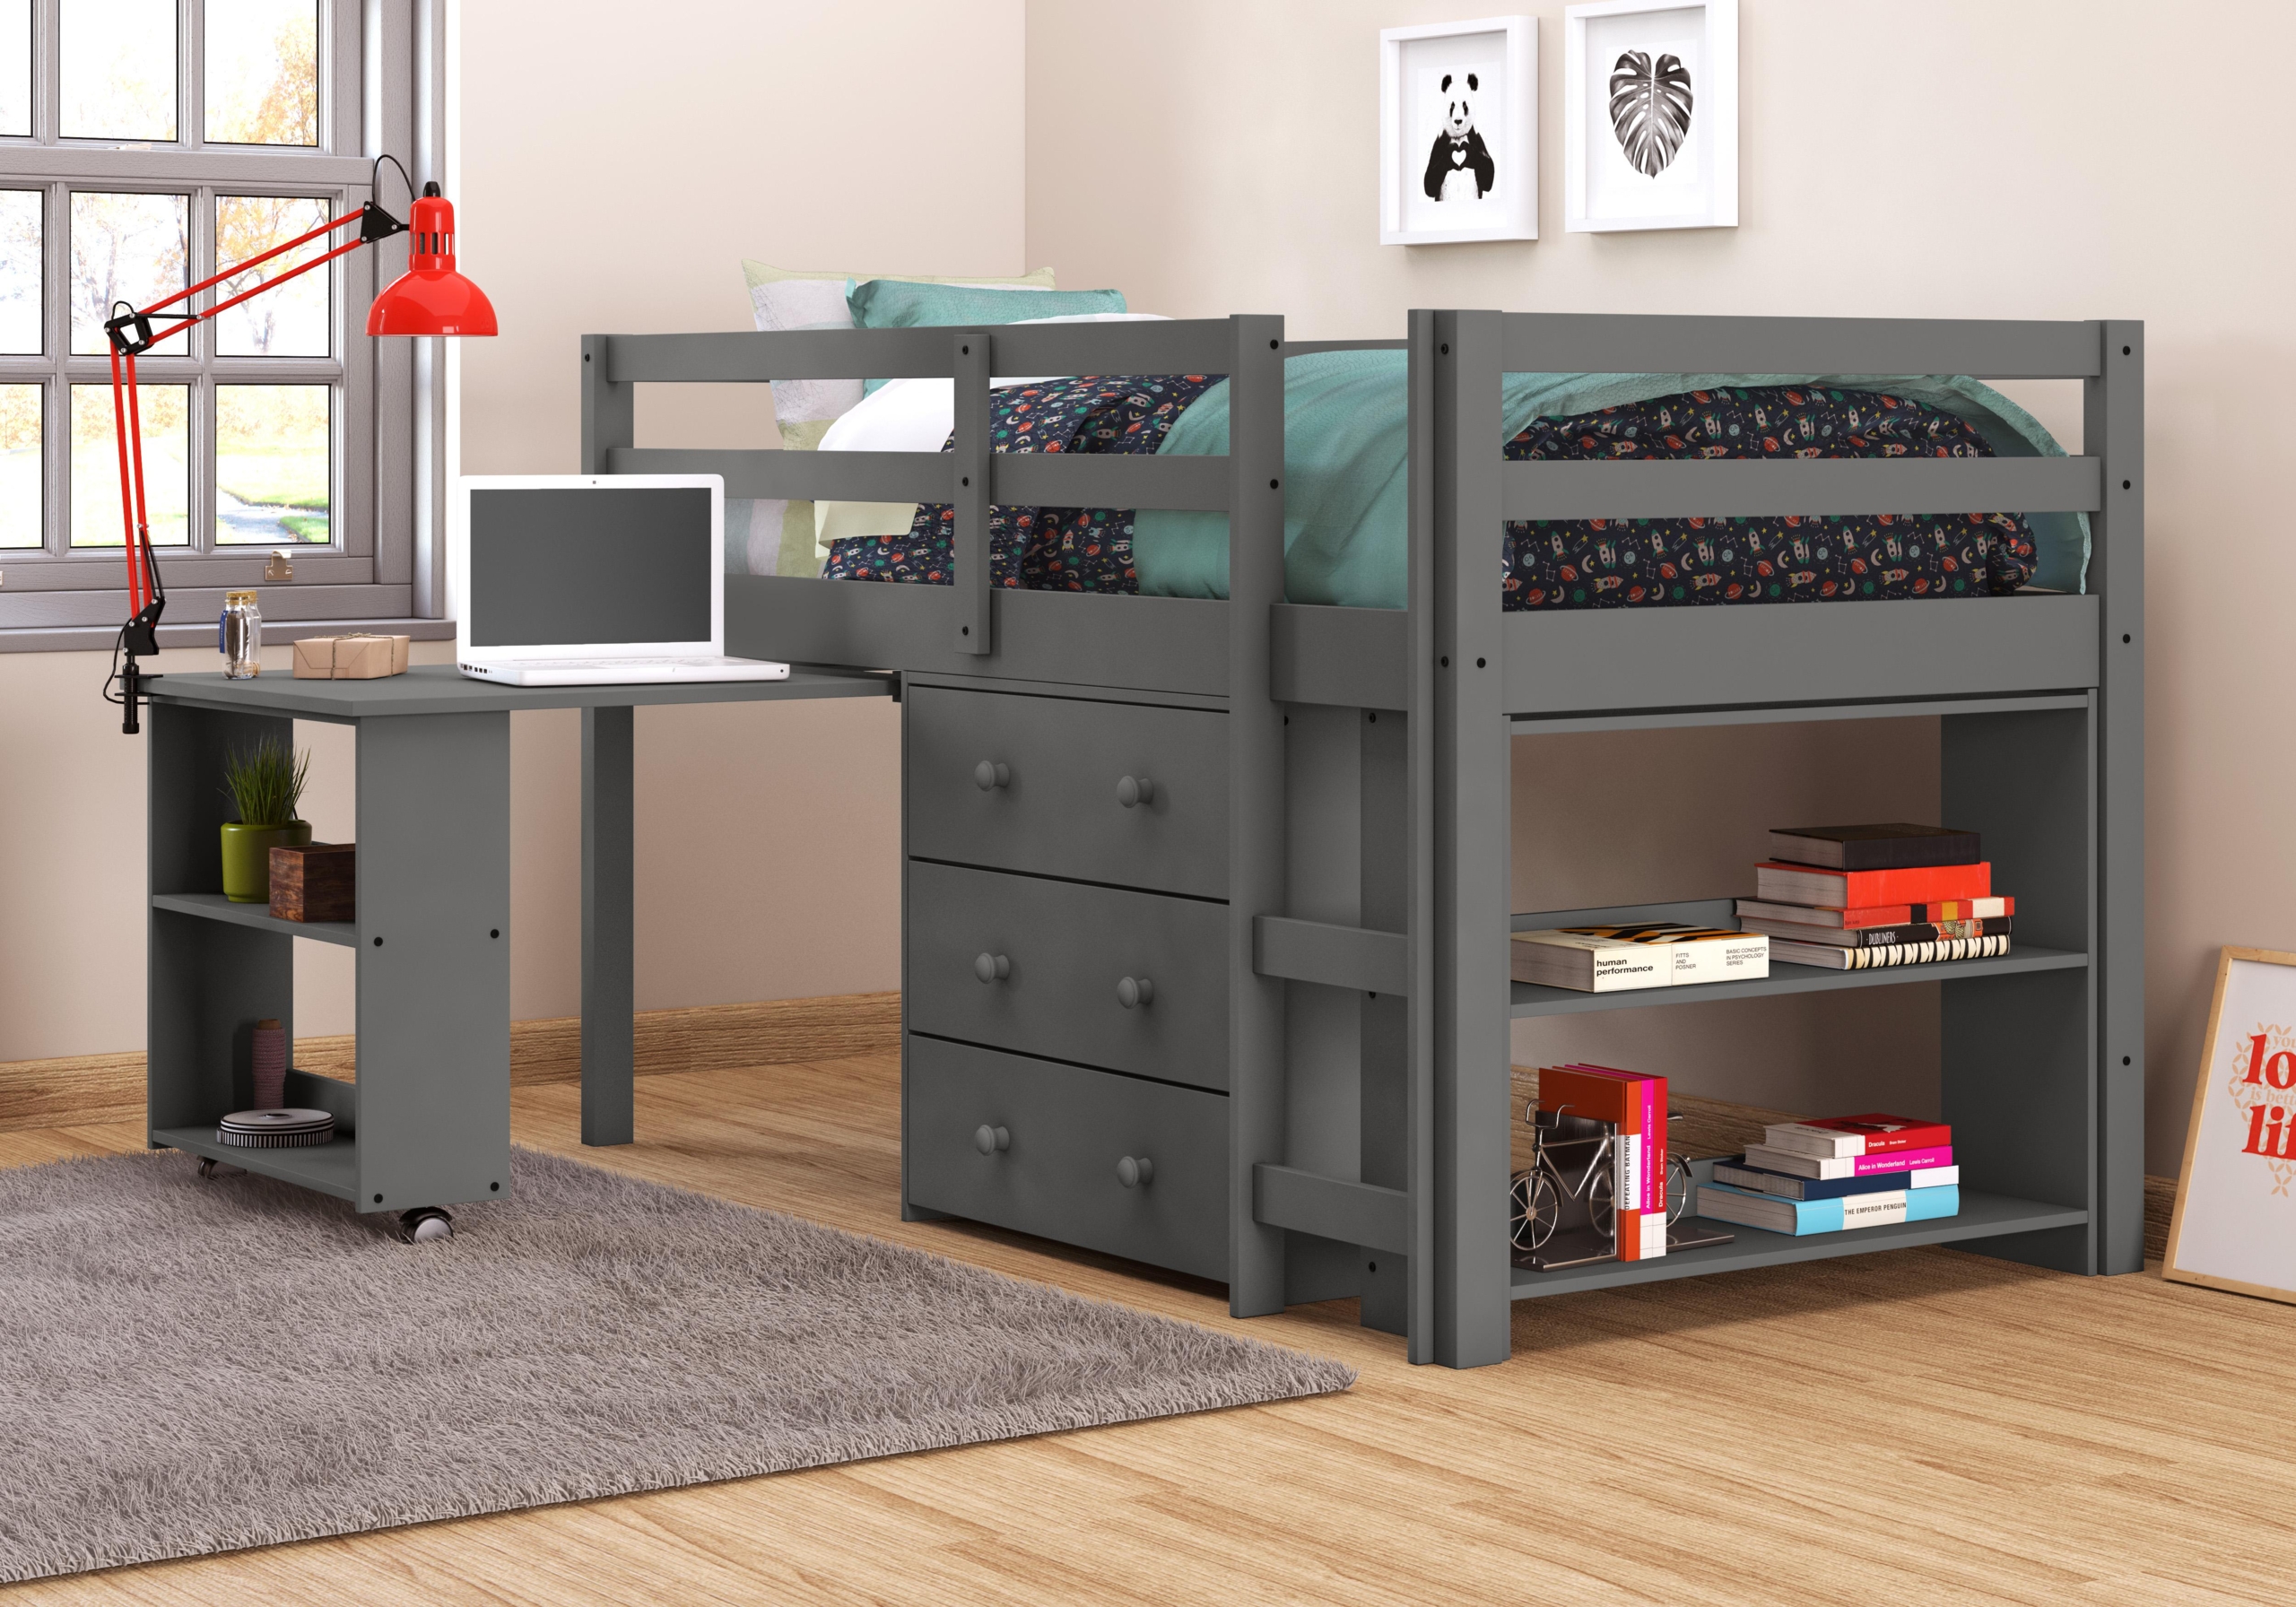 Bunk Beds With Dressers Visualhunt, Bunk With Desk And Dresser